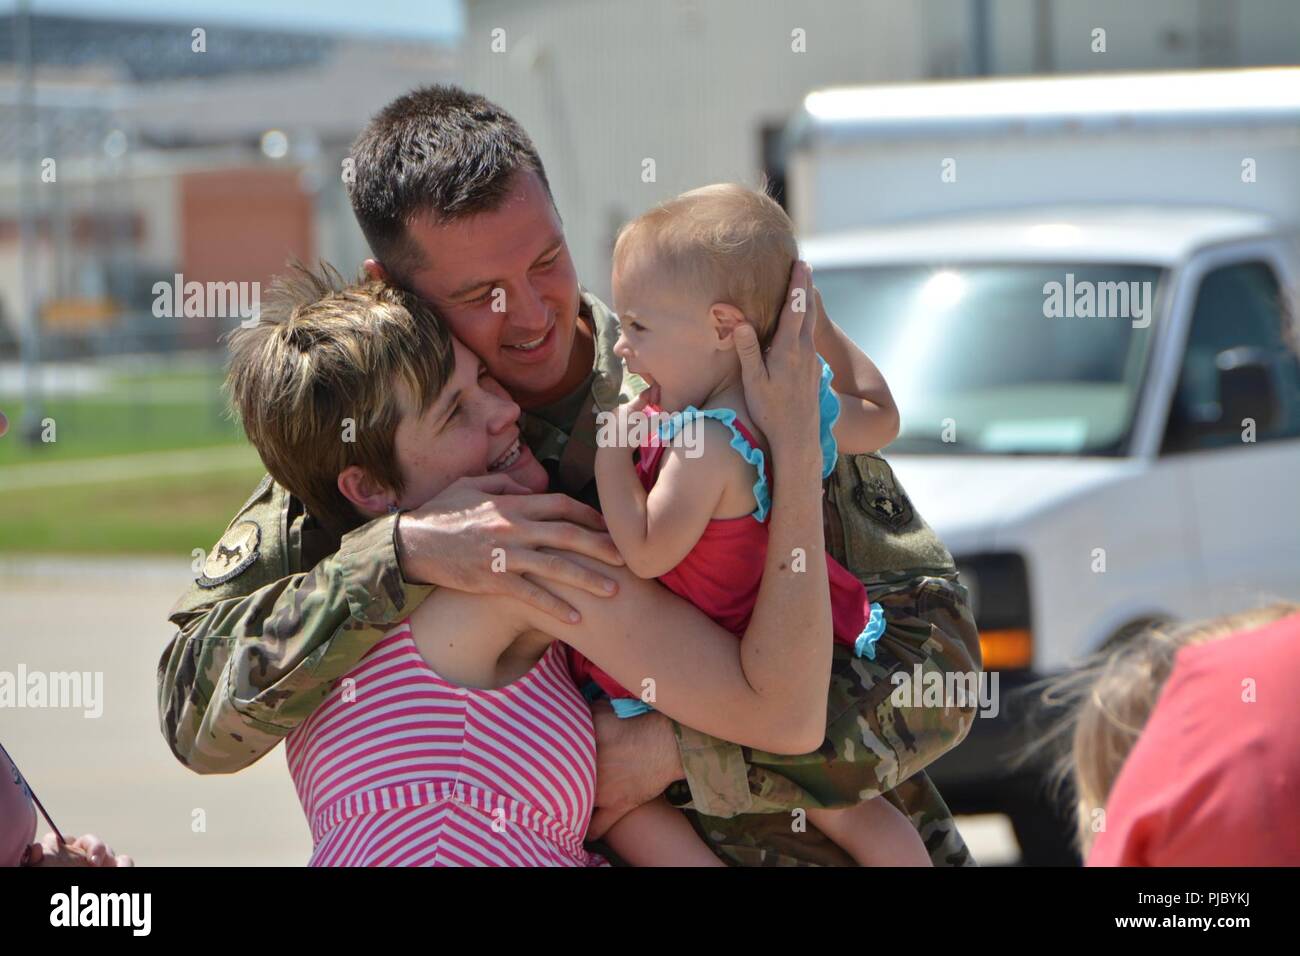 Staff Sgt. Noah Garris, a combat crew communications technician with the 507th Operations Support Squadron at Tinker Air Force Base, Okla., embraces his family following a deployment July 3, 2018. More than 100 Reserve Citizen Airmen from the 507th Air Refueling Wing at Tinker AFB deployed to Incirlik Air Base, Turkey, in support of air operations. Stock Photo